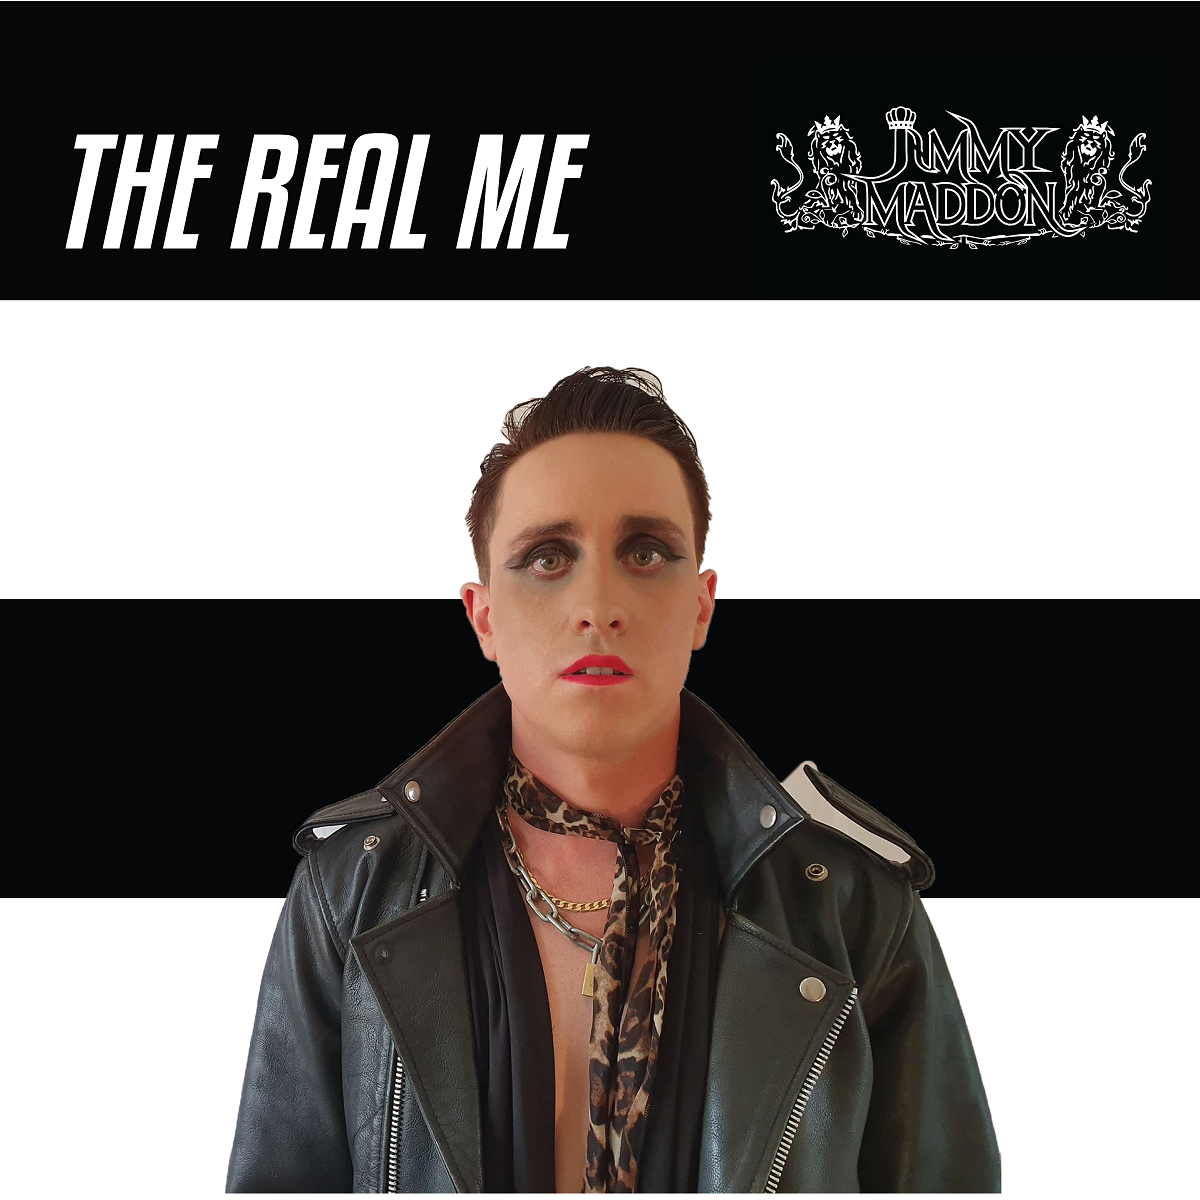 Jimmy Maddon – ‘The Real Me’